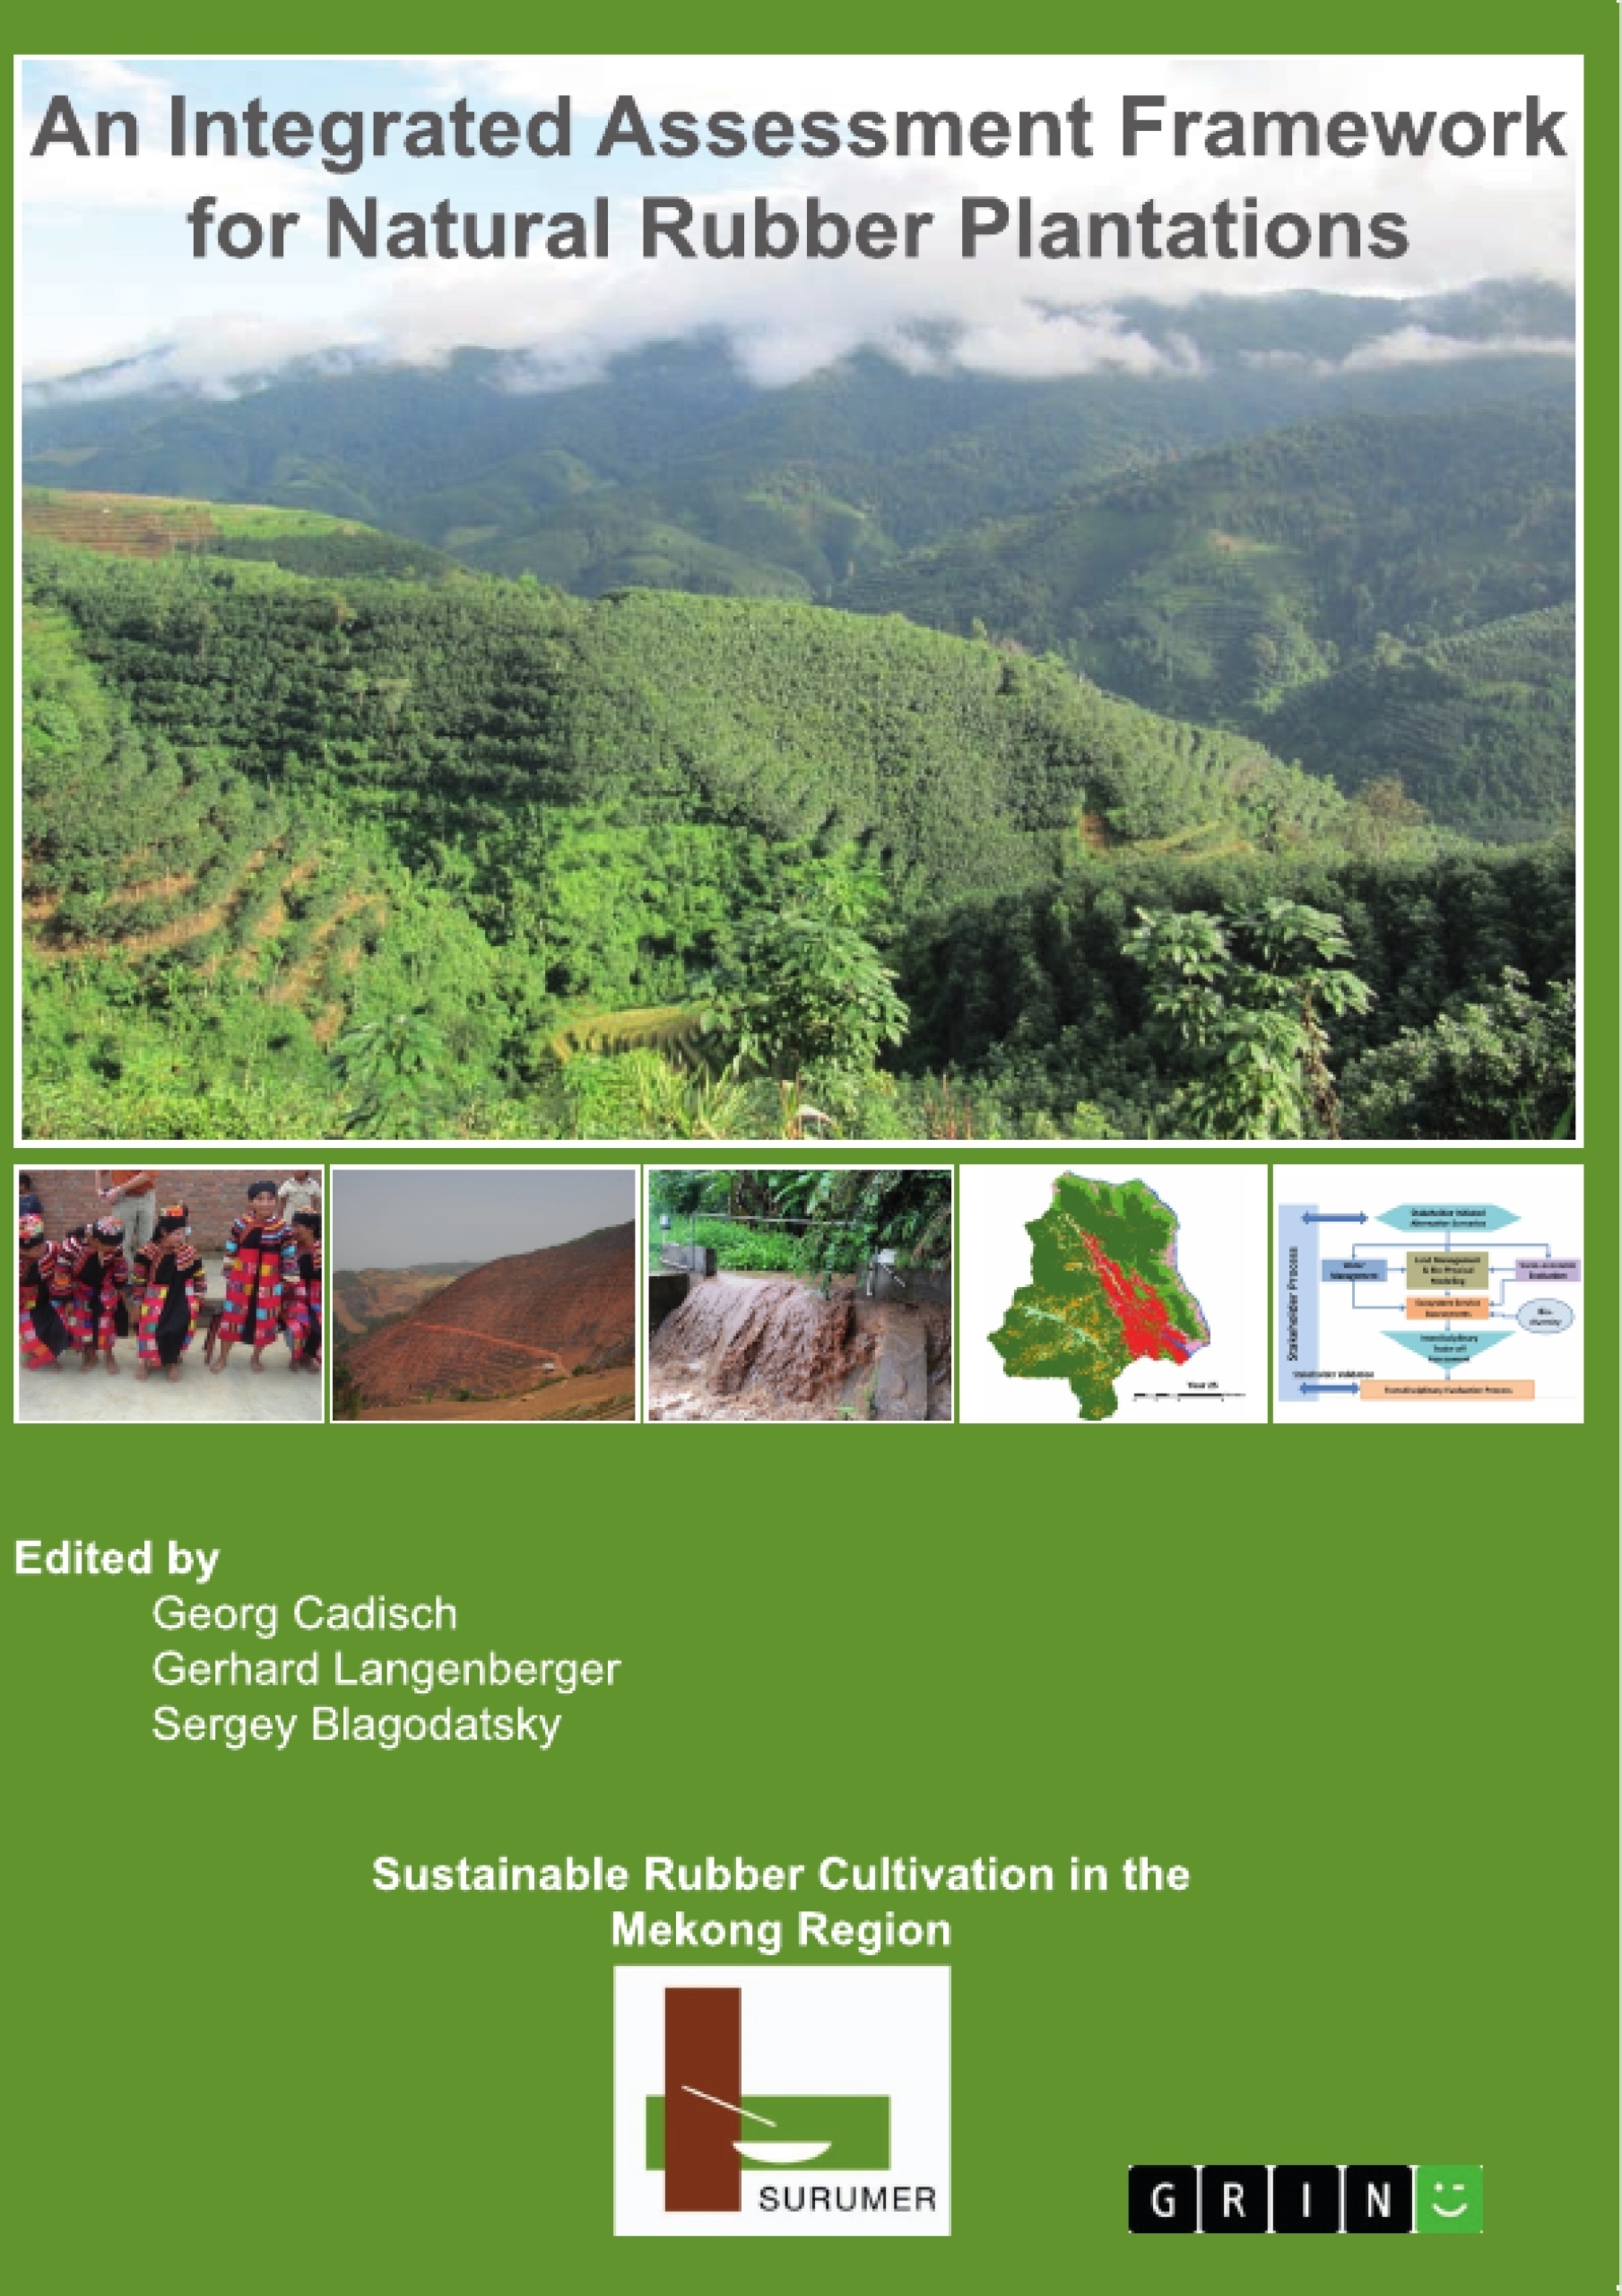 Title: Sustainable Rubber Cultivation in the Mekong Region (SURUMER)